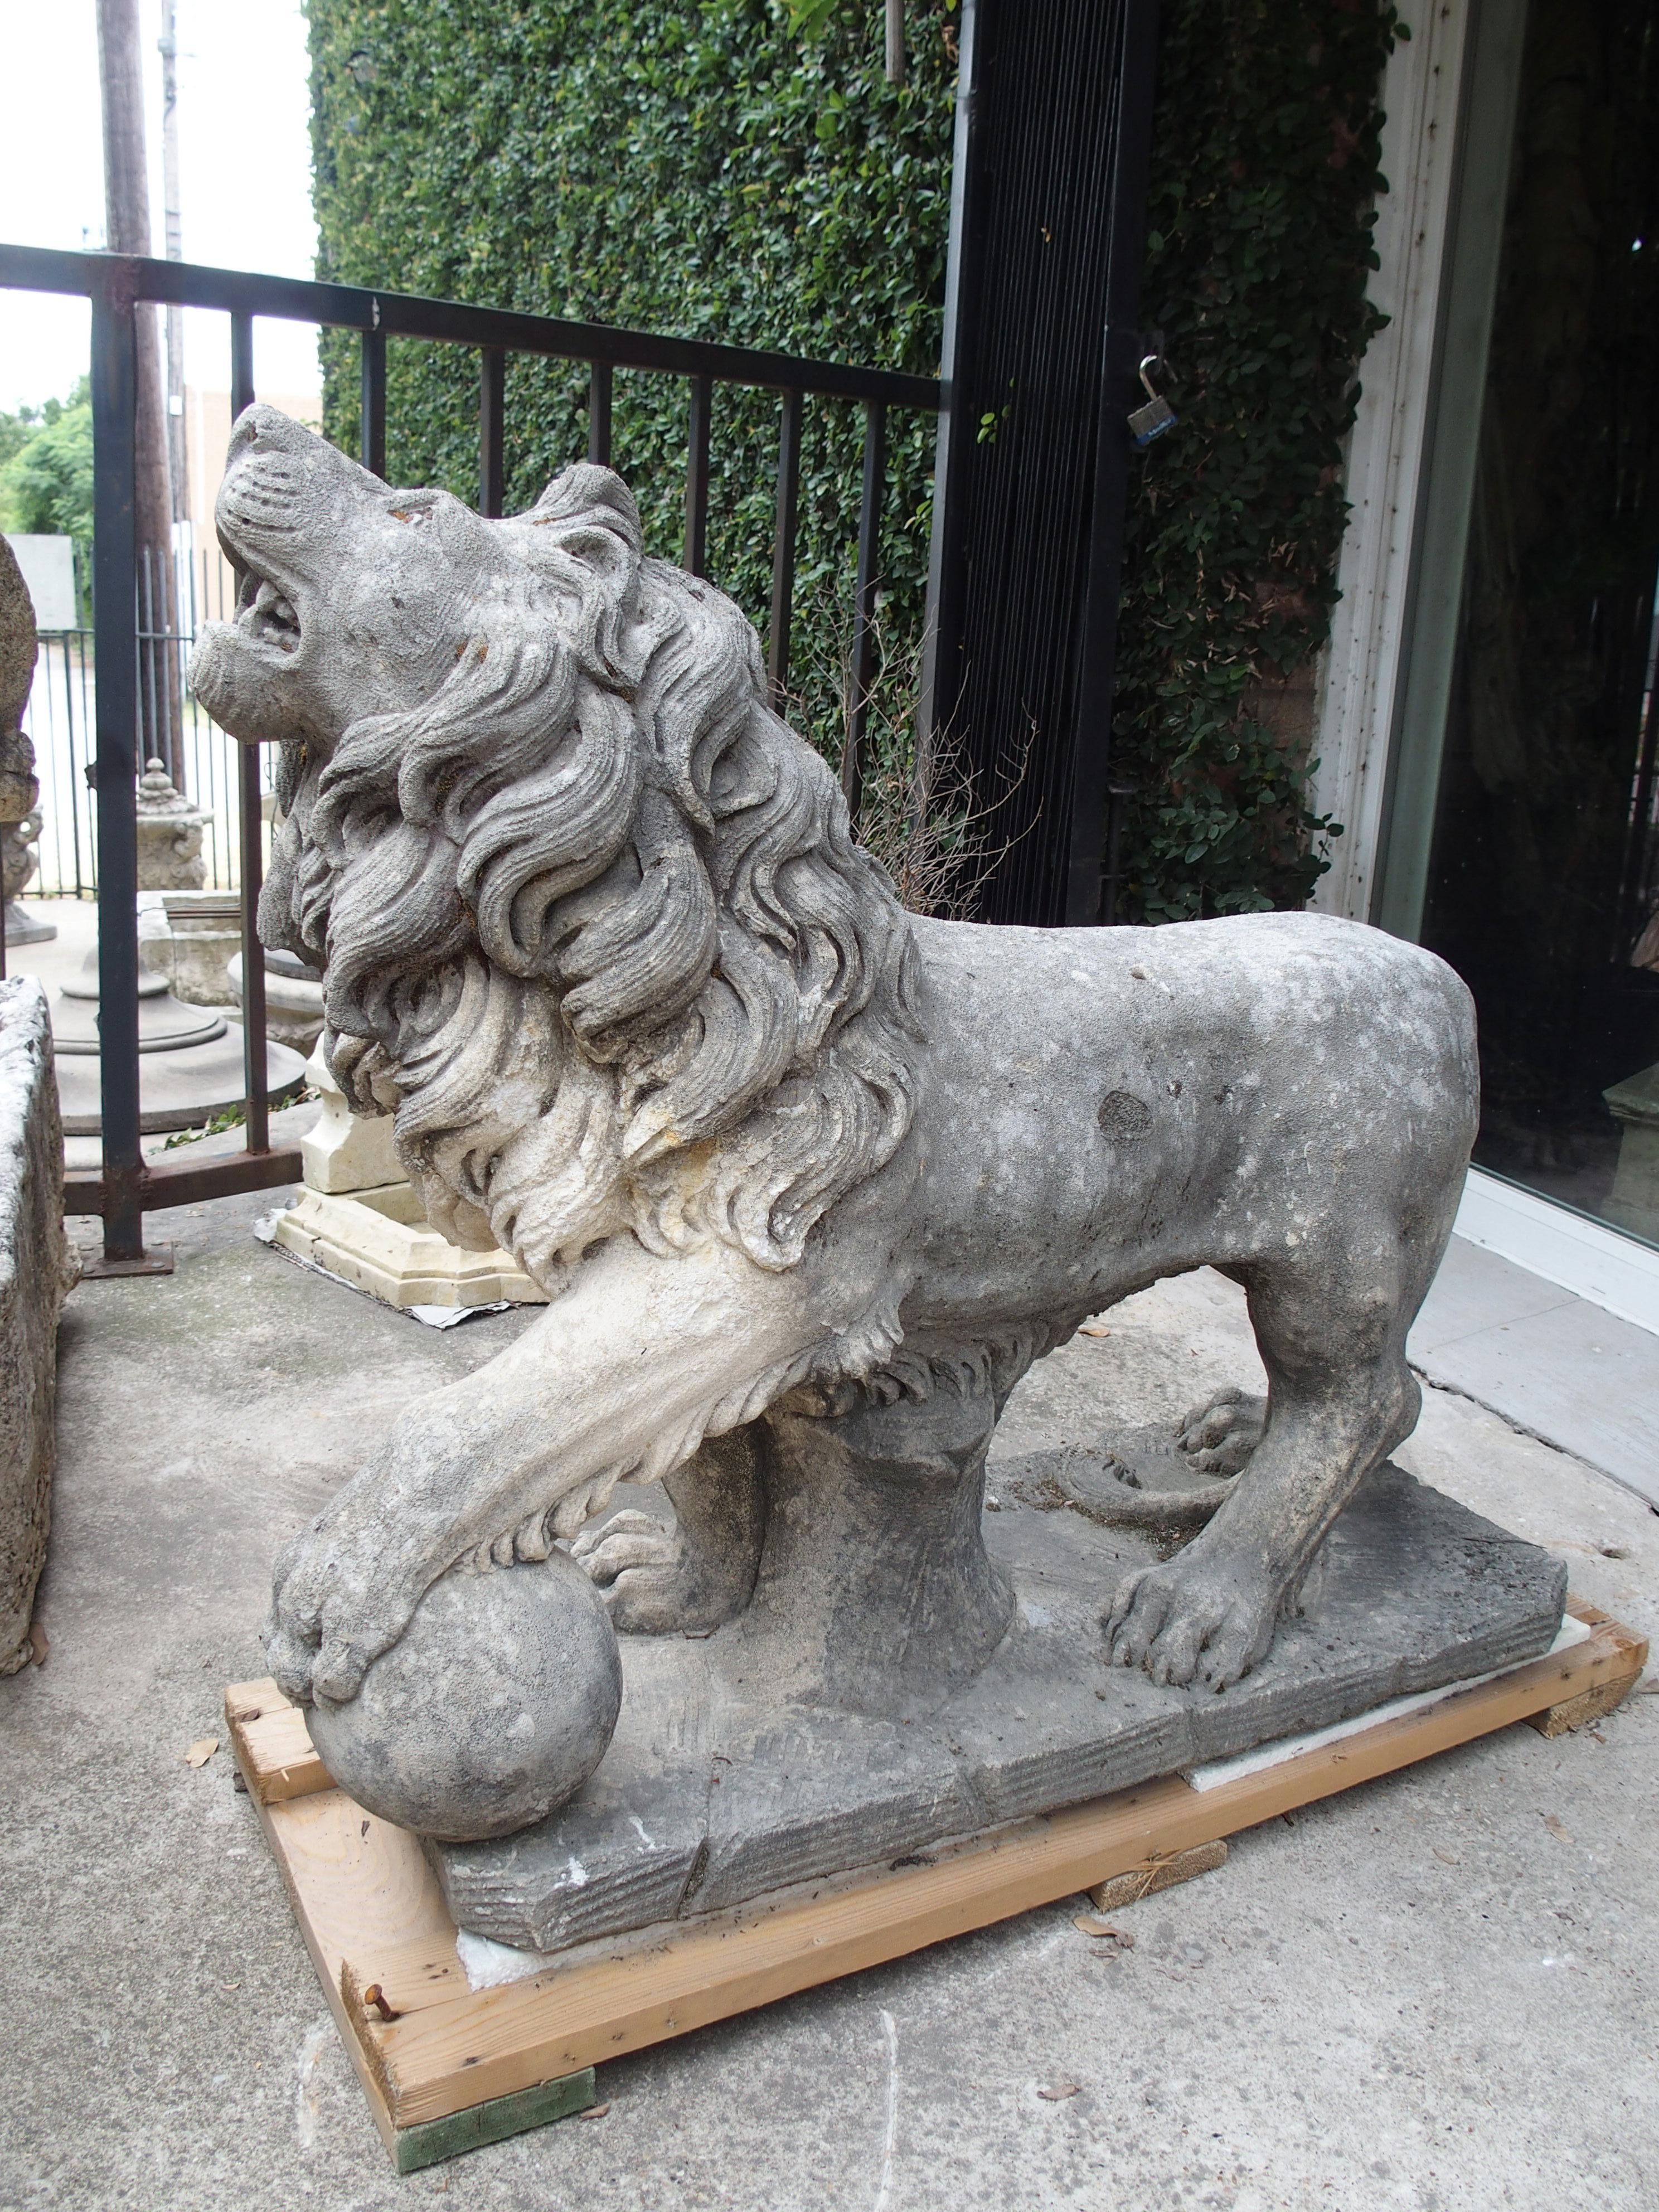 This handsome version of the Medici Lion with his paw on a ball has been carved out of a Northern Italian limestone called Vicenza. Ferdinando I de' Medici requested two lions for his garden staircase at his Tuscan villa in the 16th century. One of